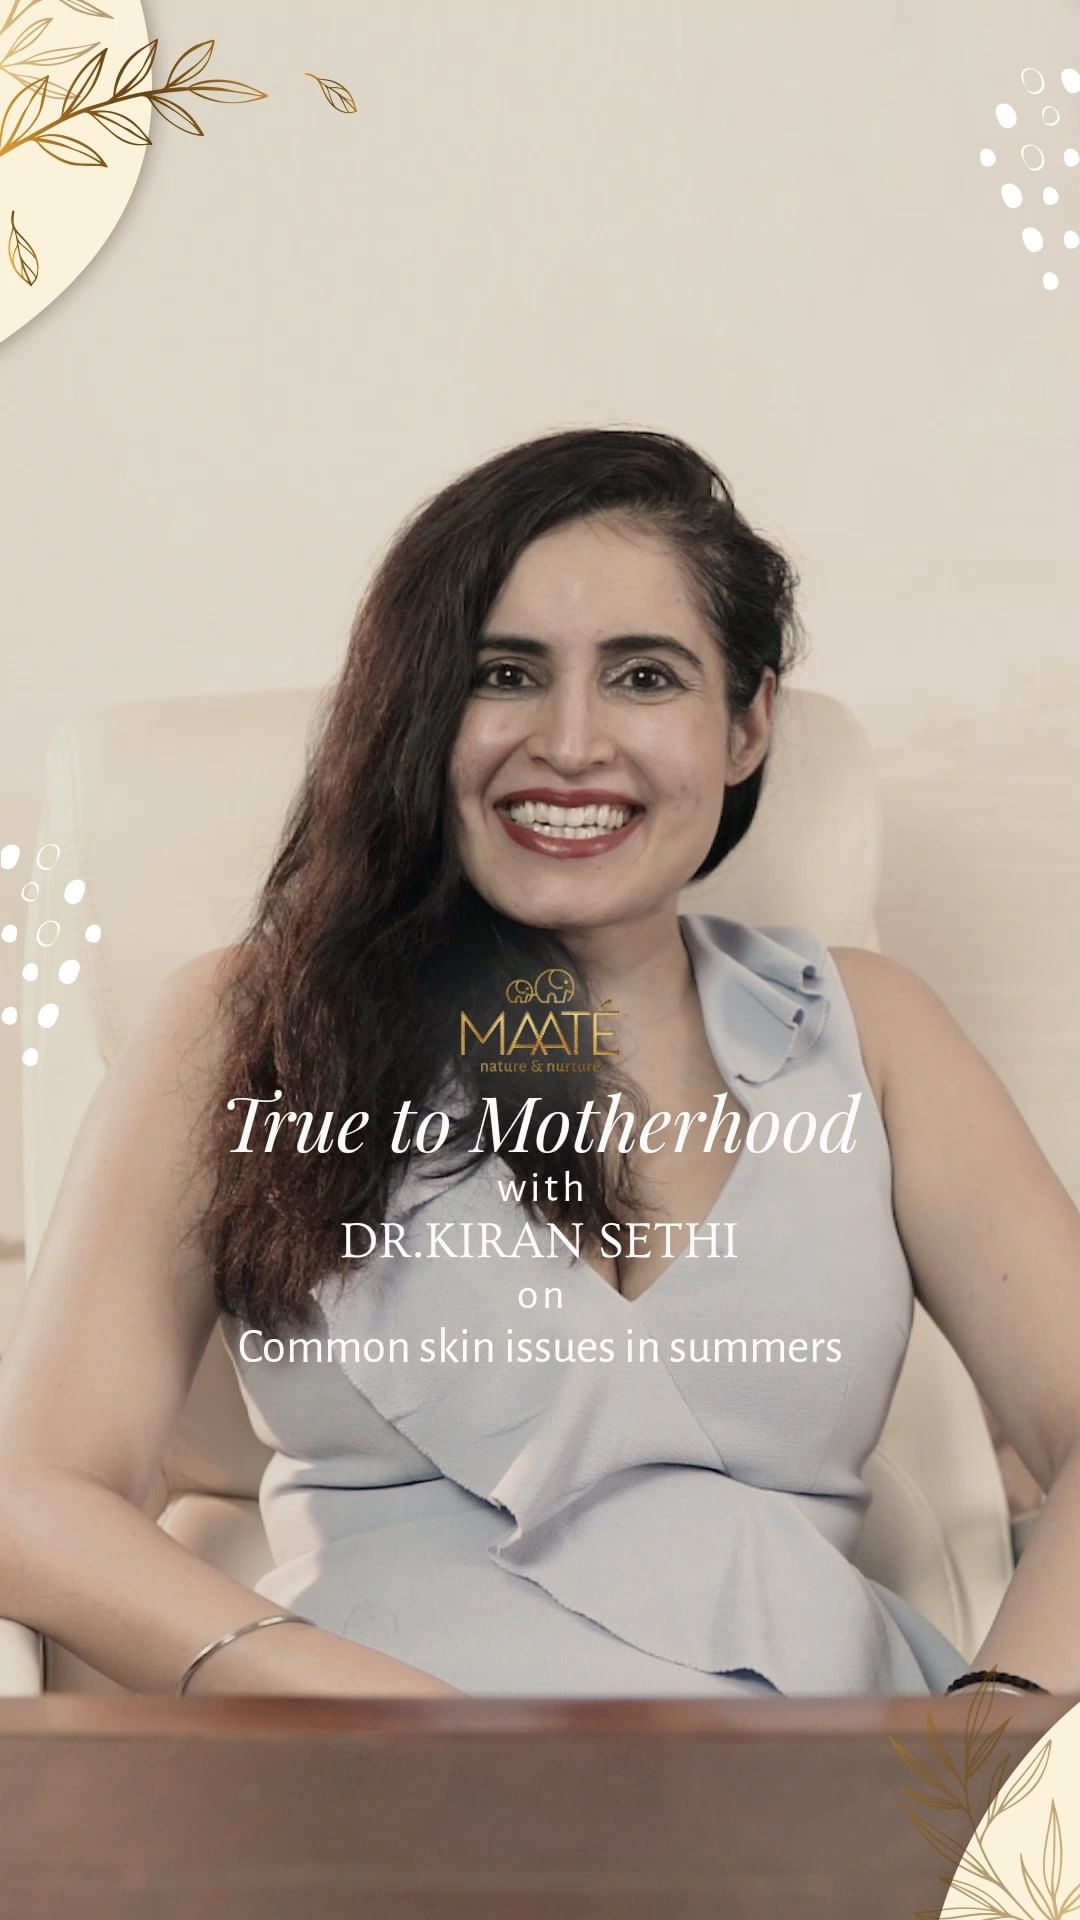 MAATÉ - True to Motherhood Series
There are several baby skin issues that may occur during summers that need your immediate attention. Dr. Kiran, our skincare expert will be discussing all baby skin-...